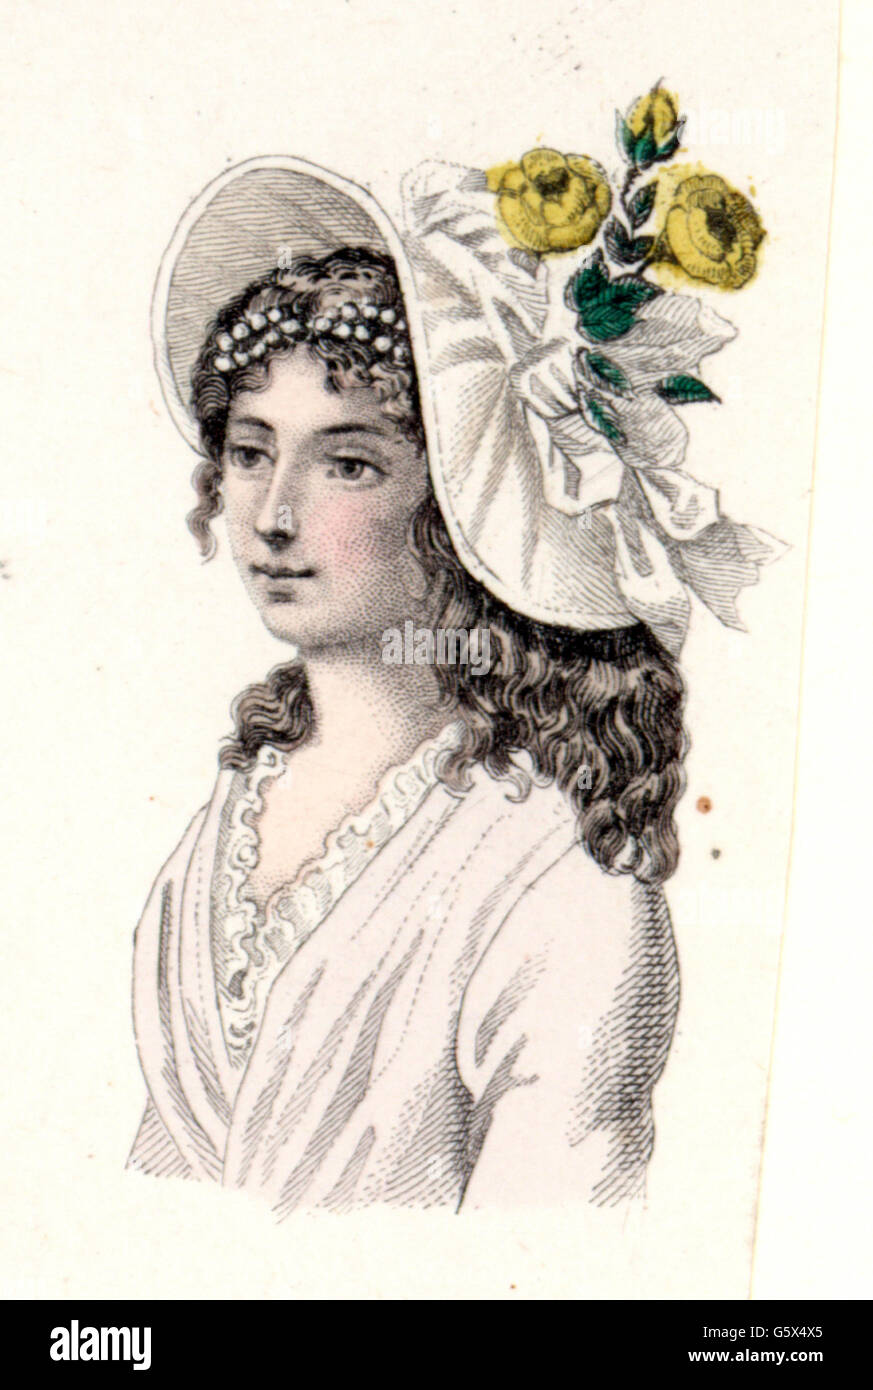 fashion, 18th century, woman with summer hat, 1797, Additional-Rights-Clearences-Not Available Stock Photo